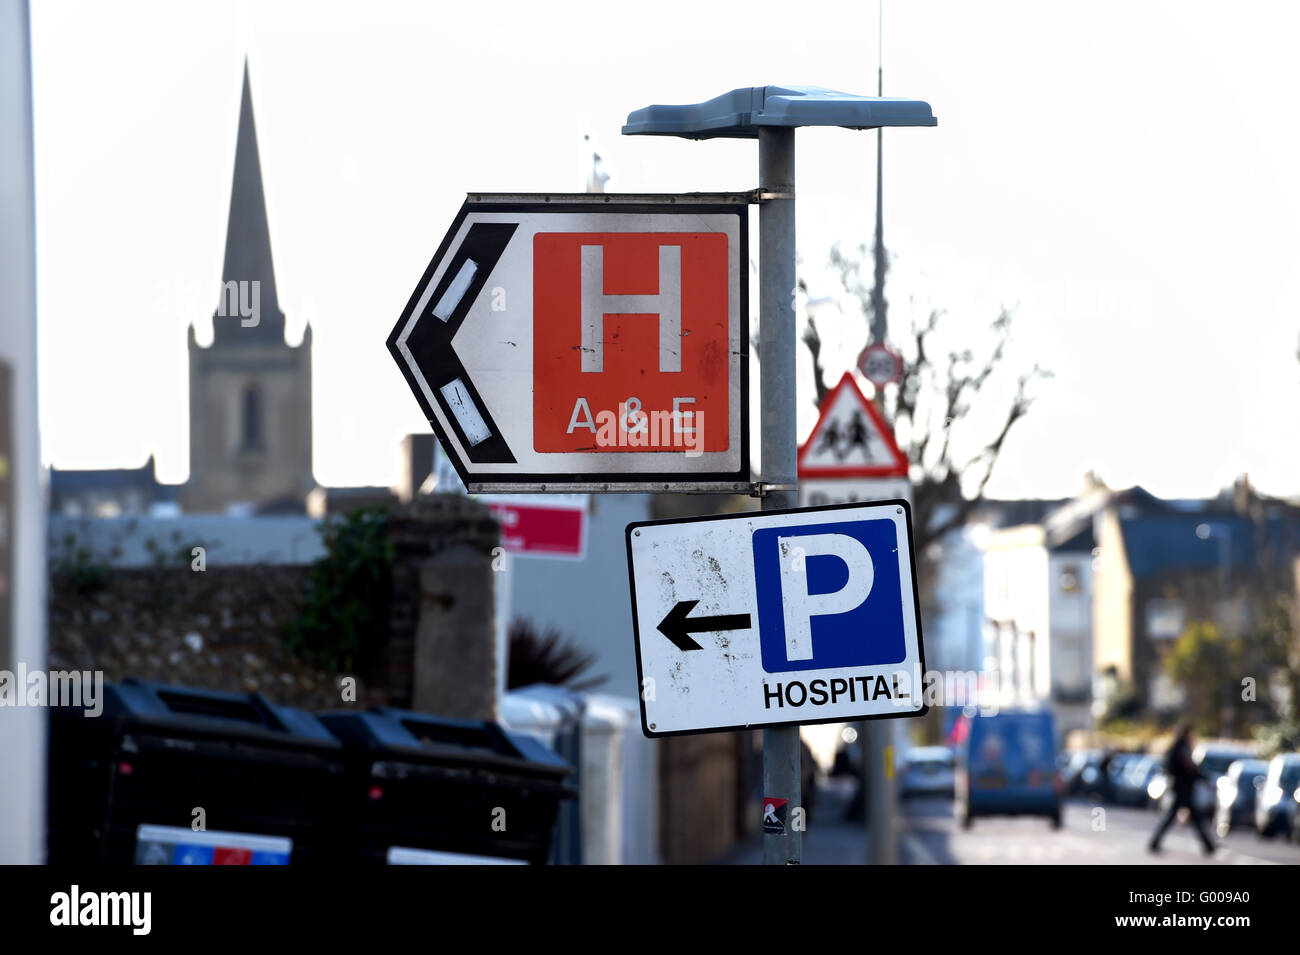 Royal Sussex County Hospital A&E and Car Parkling signs Brighton UK Stock Photo